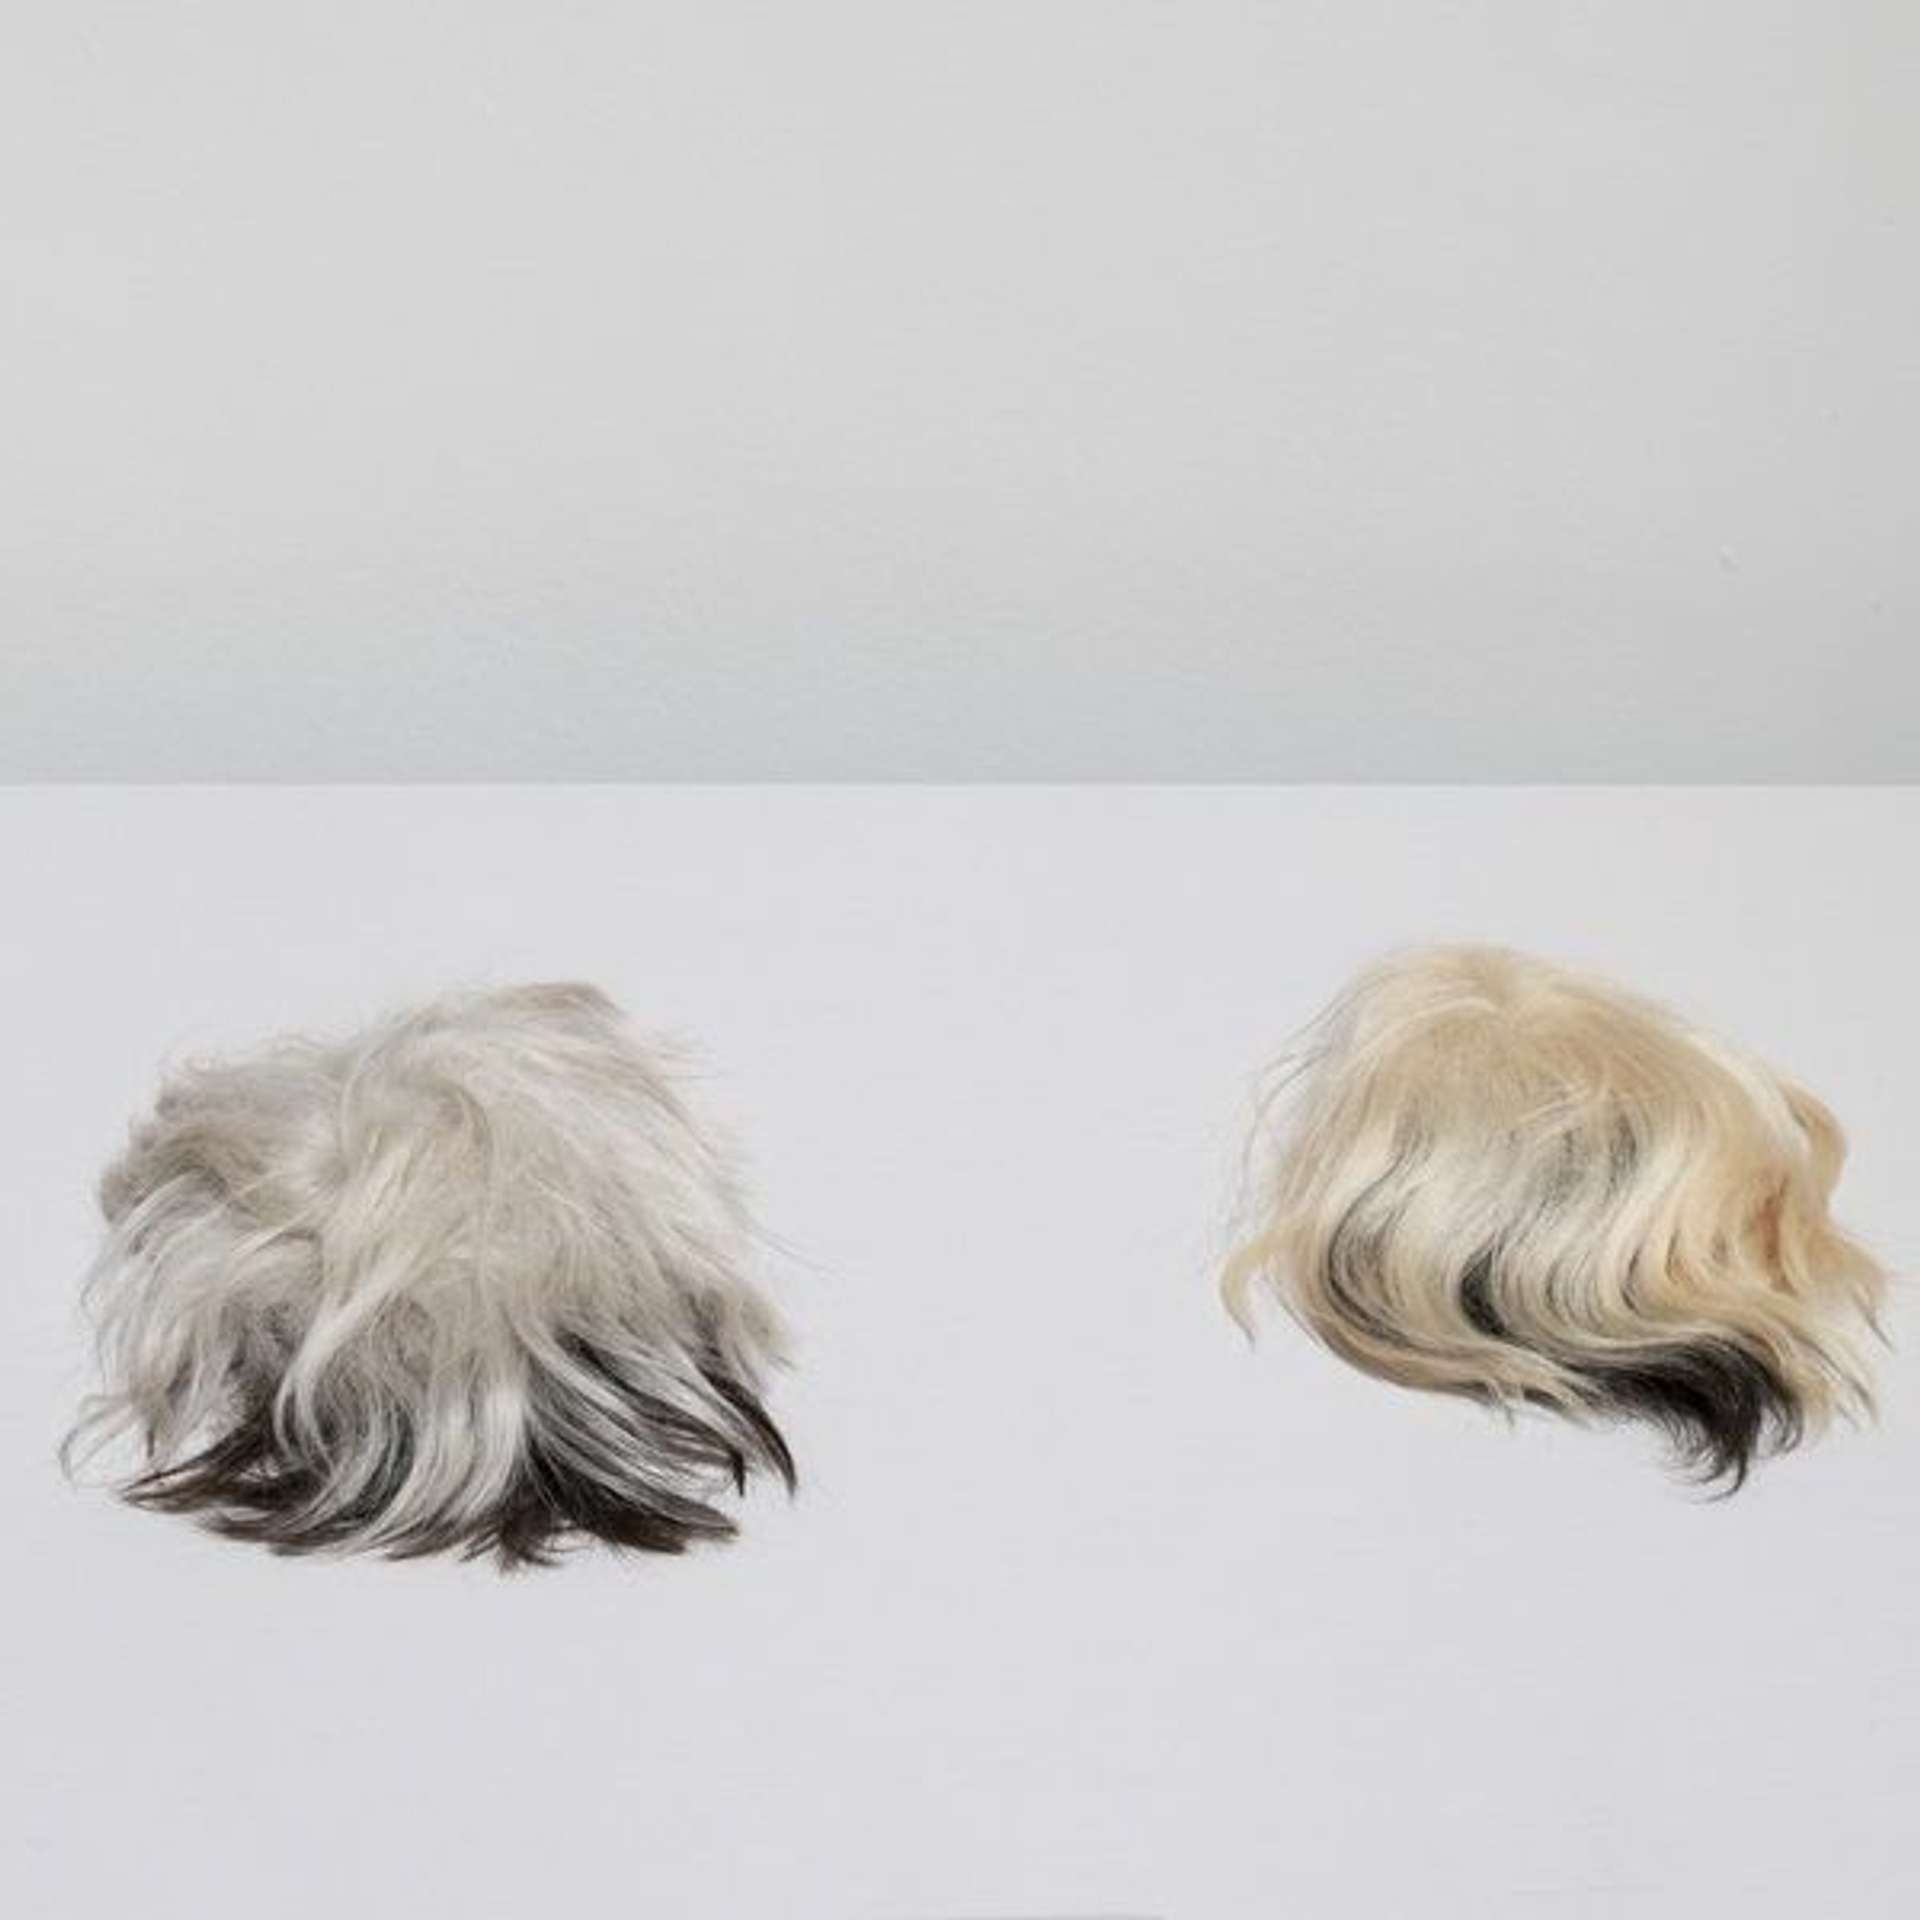 Wigs by Andrew Dunkley, Tate photography - MyArtBroker